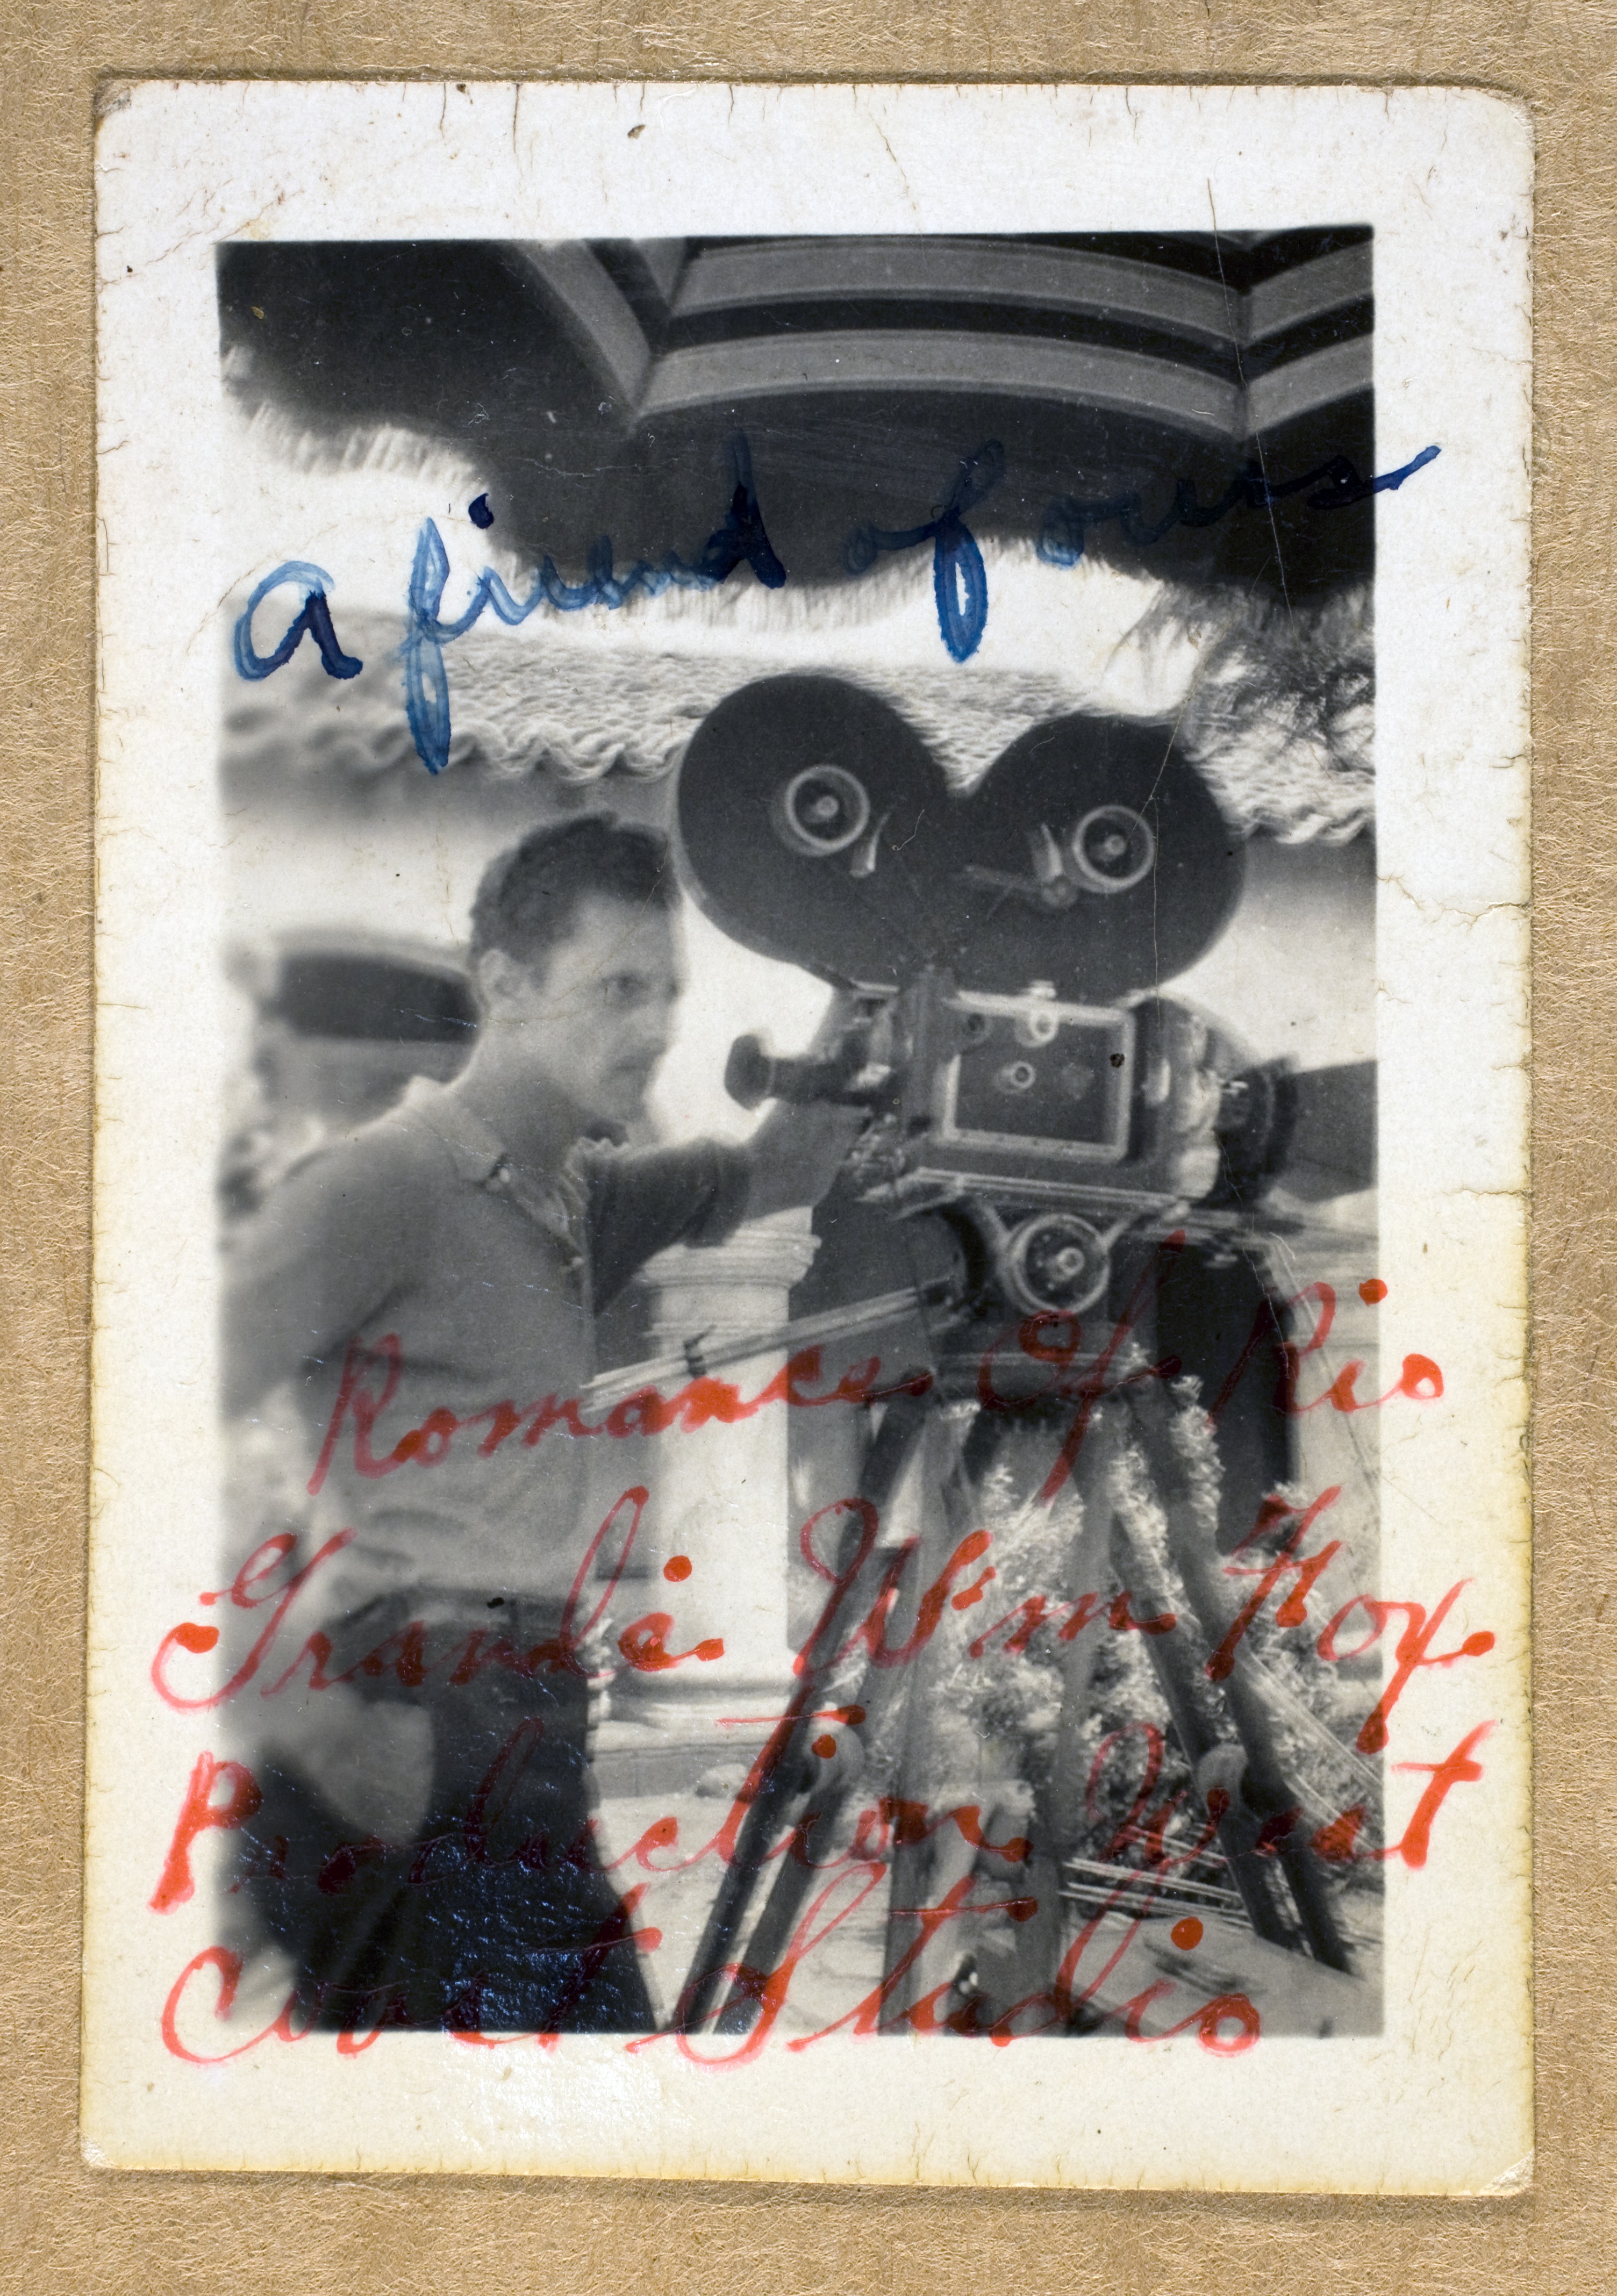 Unknown man at unknown location with movie camera.  Handwritten on photograph is "A friend of ours.  Romance of Rio Grande. W'm Fox Production West Coast Studio"